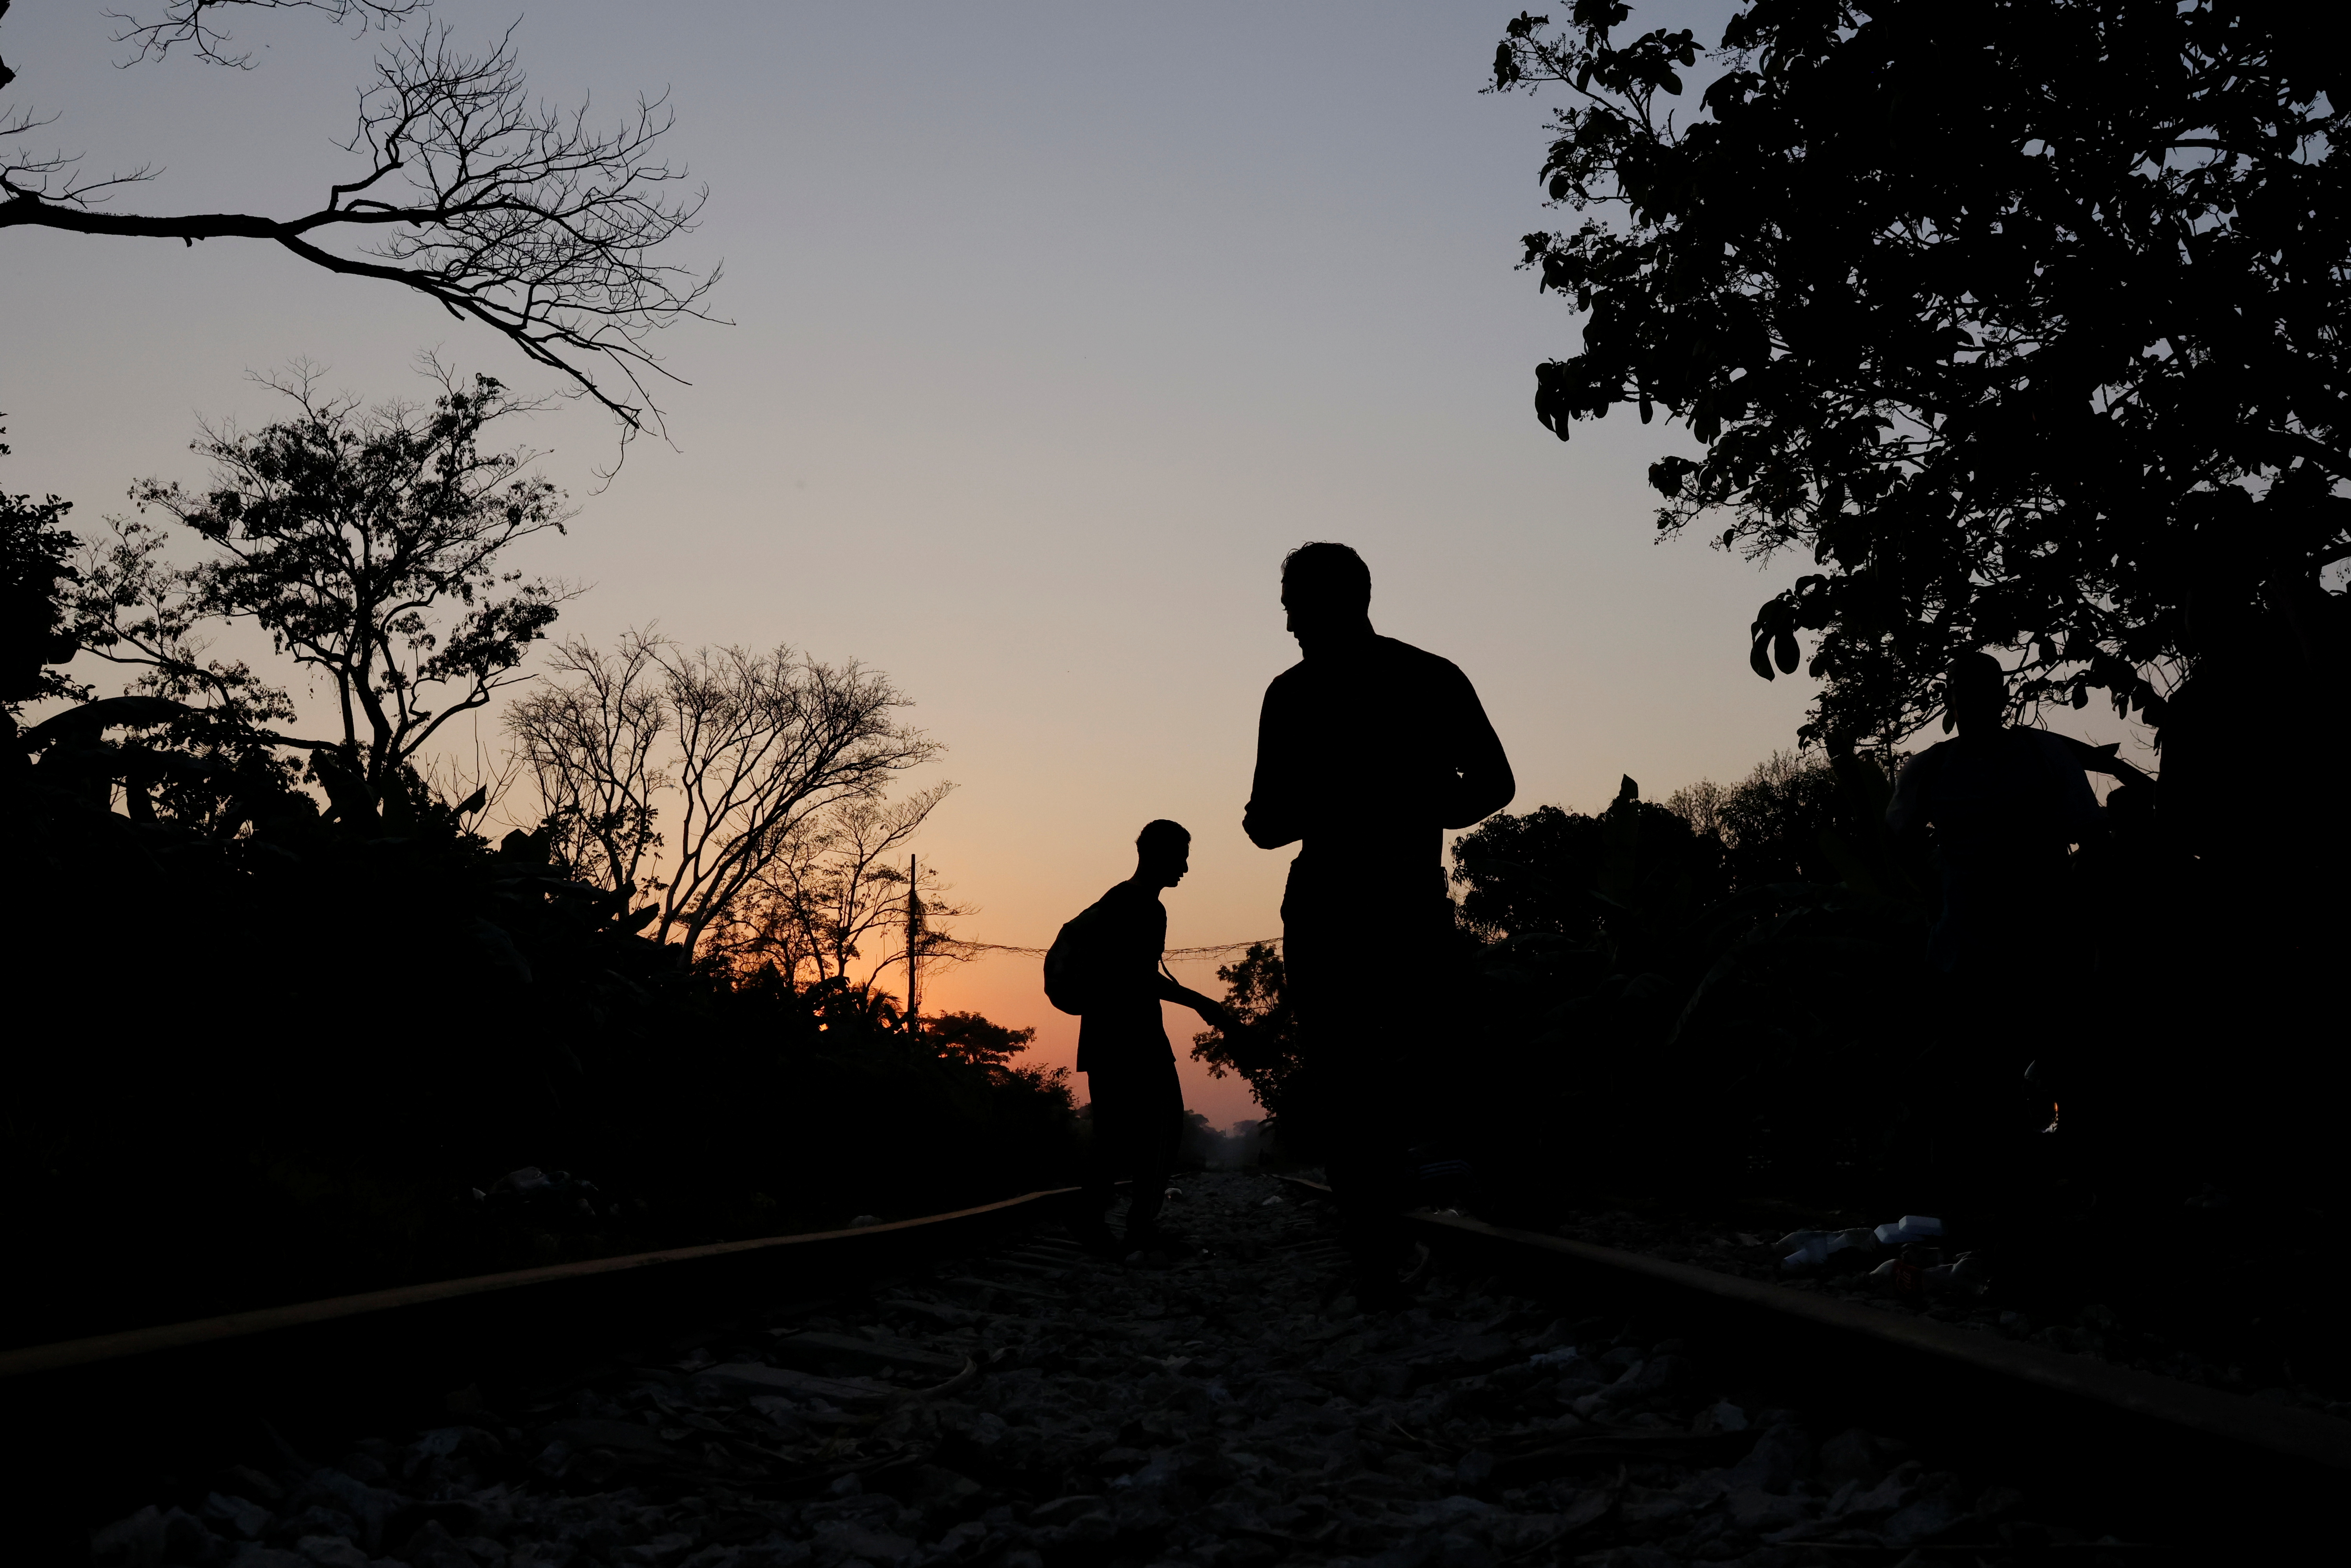 A group of Central American migrants rest along the railway track on their way to the United States in Macuspana, Tabasco, Mexico March 25, 2021. REUTERS/Carlos Jasso